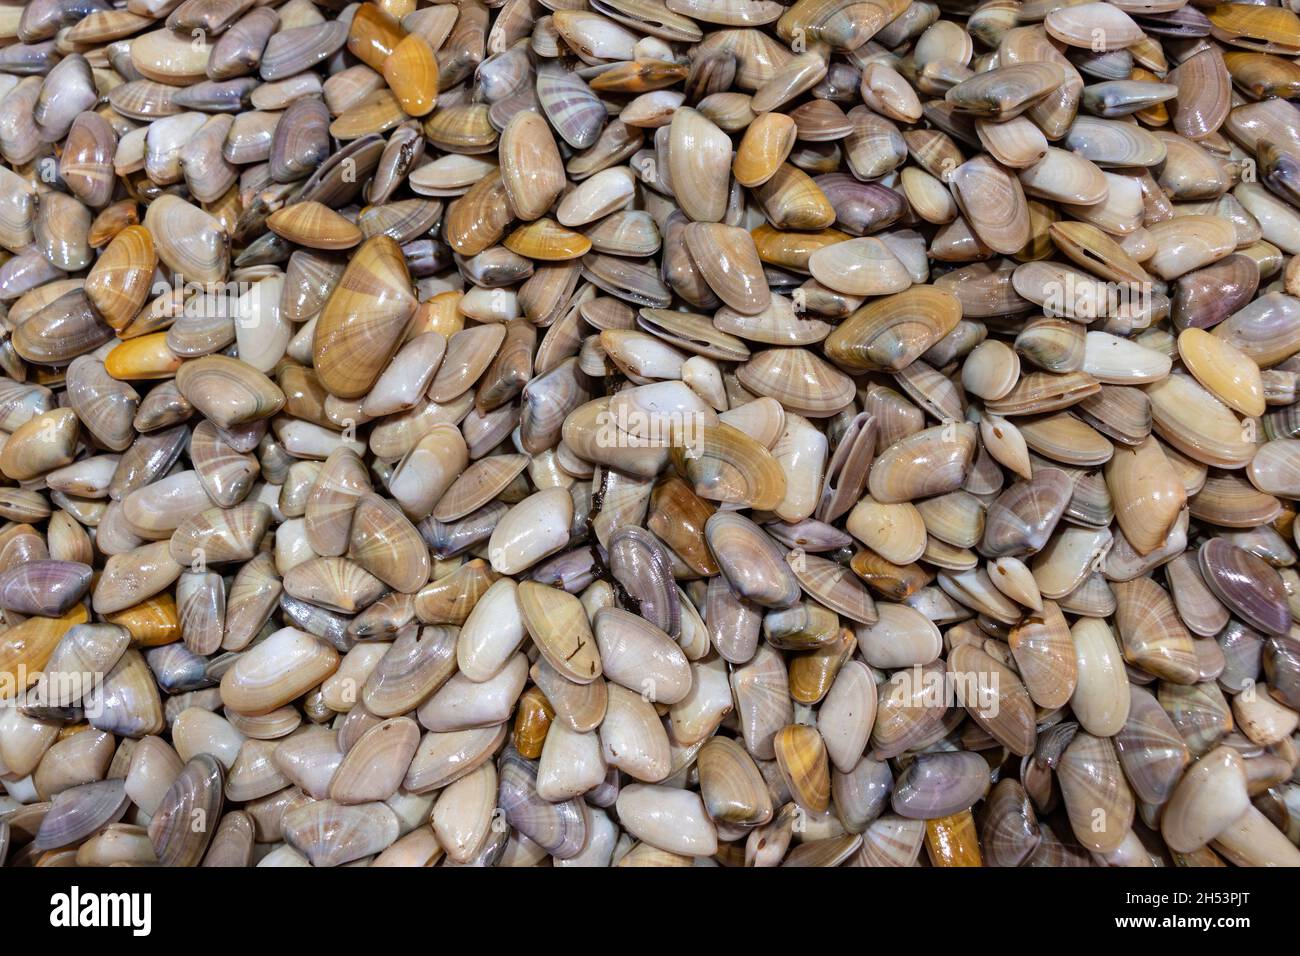 View of Texture of raw clams (coquina) Stock Photo